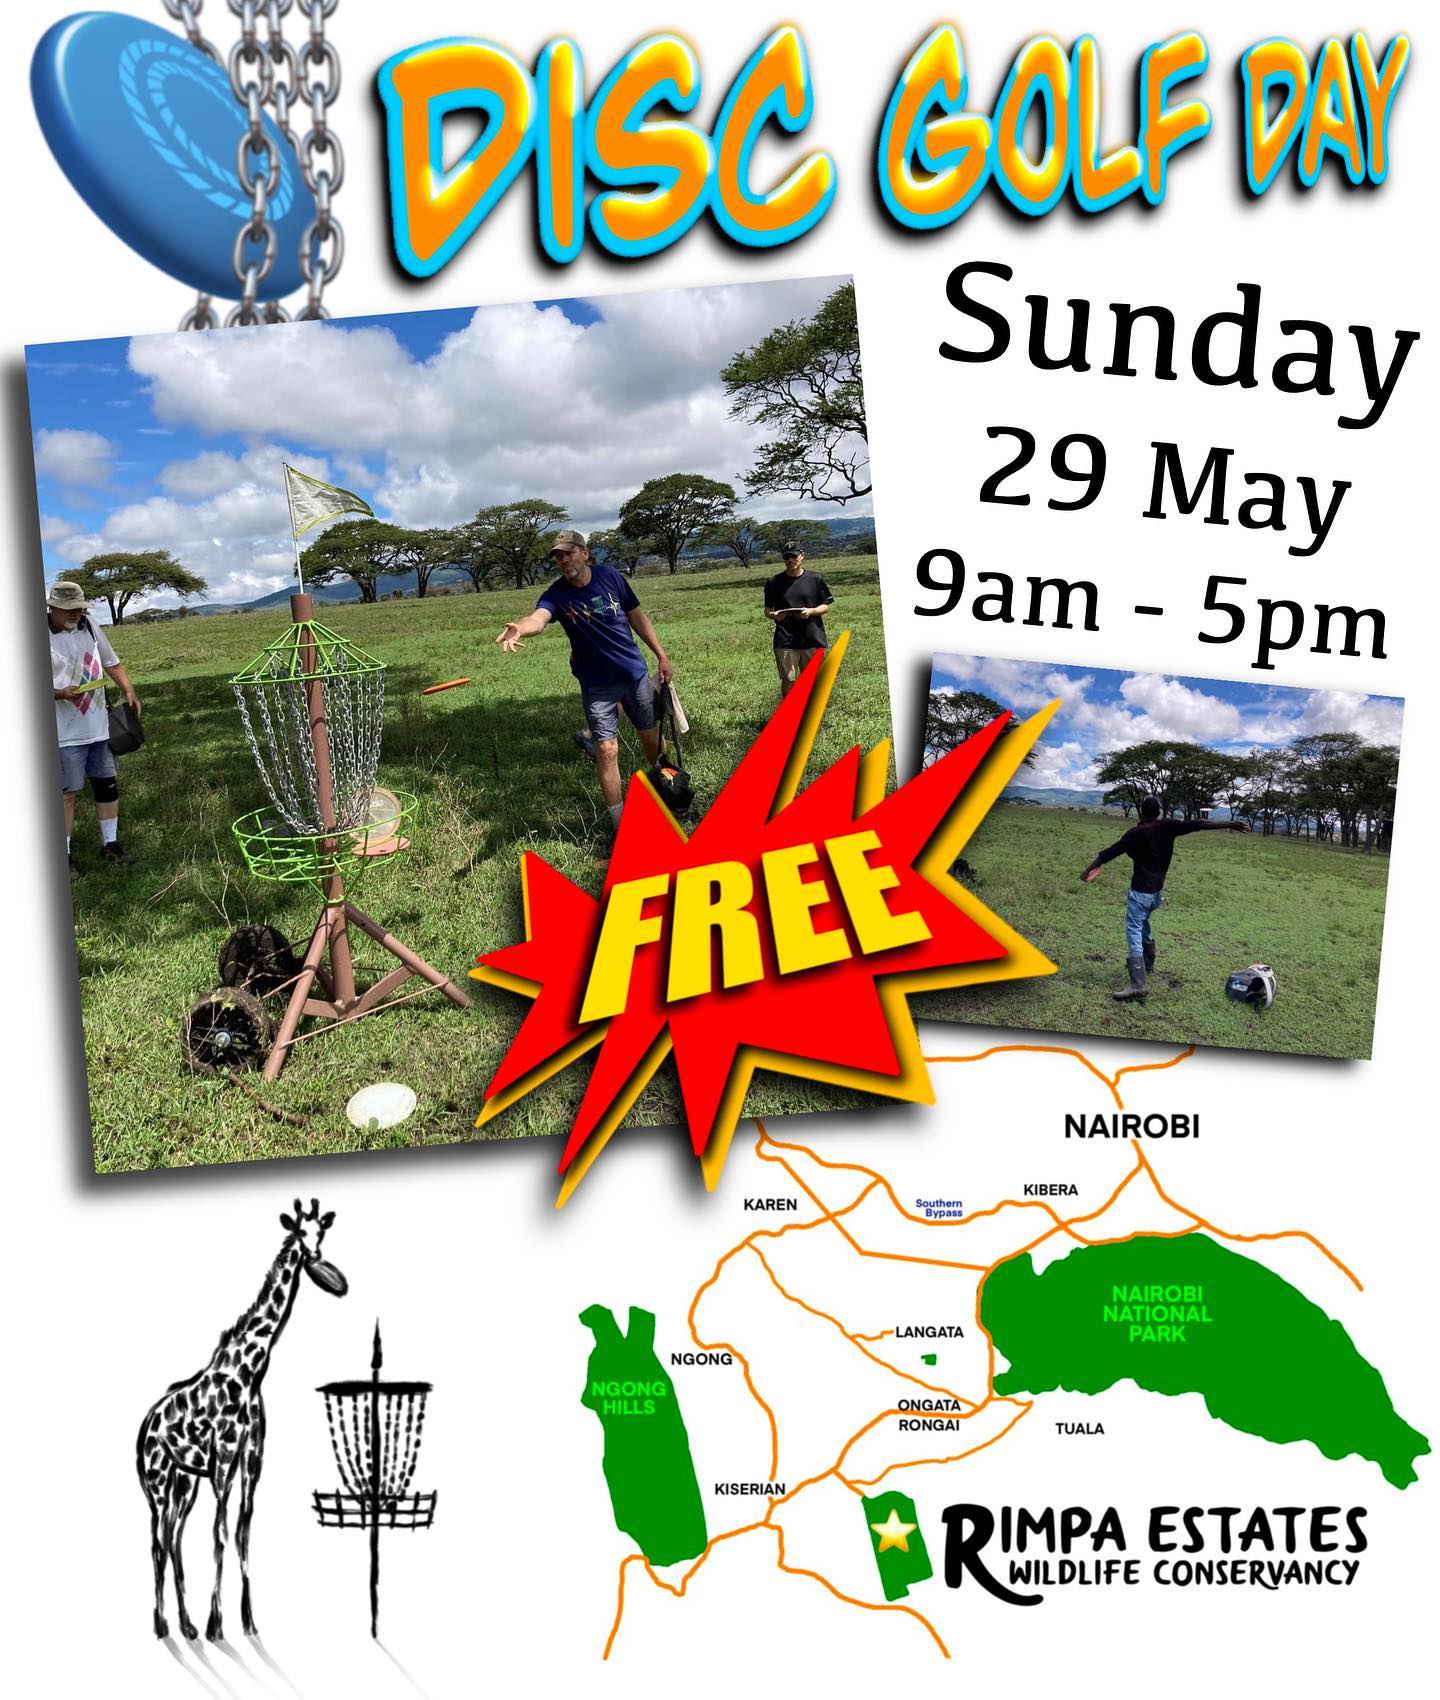 The next FREE Disc Golf Day here at The Reserve at Rimpa Estates Wildlife Conservancy will take place on 29 May from 9am to 5pm. 

You can arrive at any time, and stay as short or long as you like. You can also bring food and have a picnic if you want. 

I will be teaching new players how to play. Any experienced players are welcome to either help teach or play a few rounds. 

We now have 3 permanent baskets and 3 portable baskets!

Special thanks to the @paulmcbethfoundation and the @pdga for funding our course! 

#discgolf #discgolfkenya #nairobi #kenya #paulmcbethfoundation #pdga #discgolfafrica #pmf #discgolfbaskets #discgolfdaily #nairobidaytrips